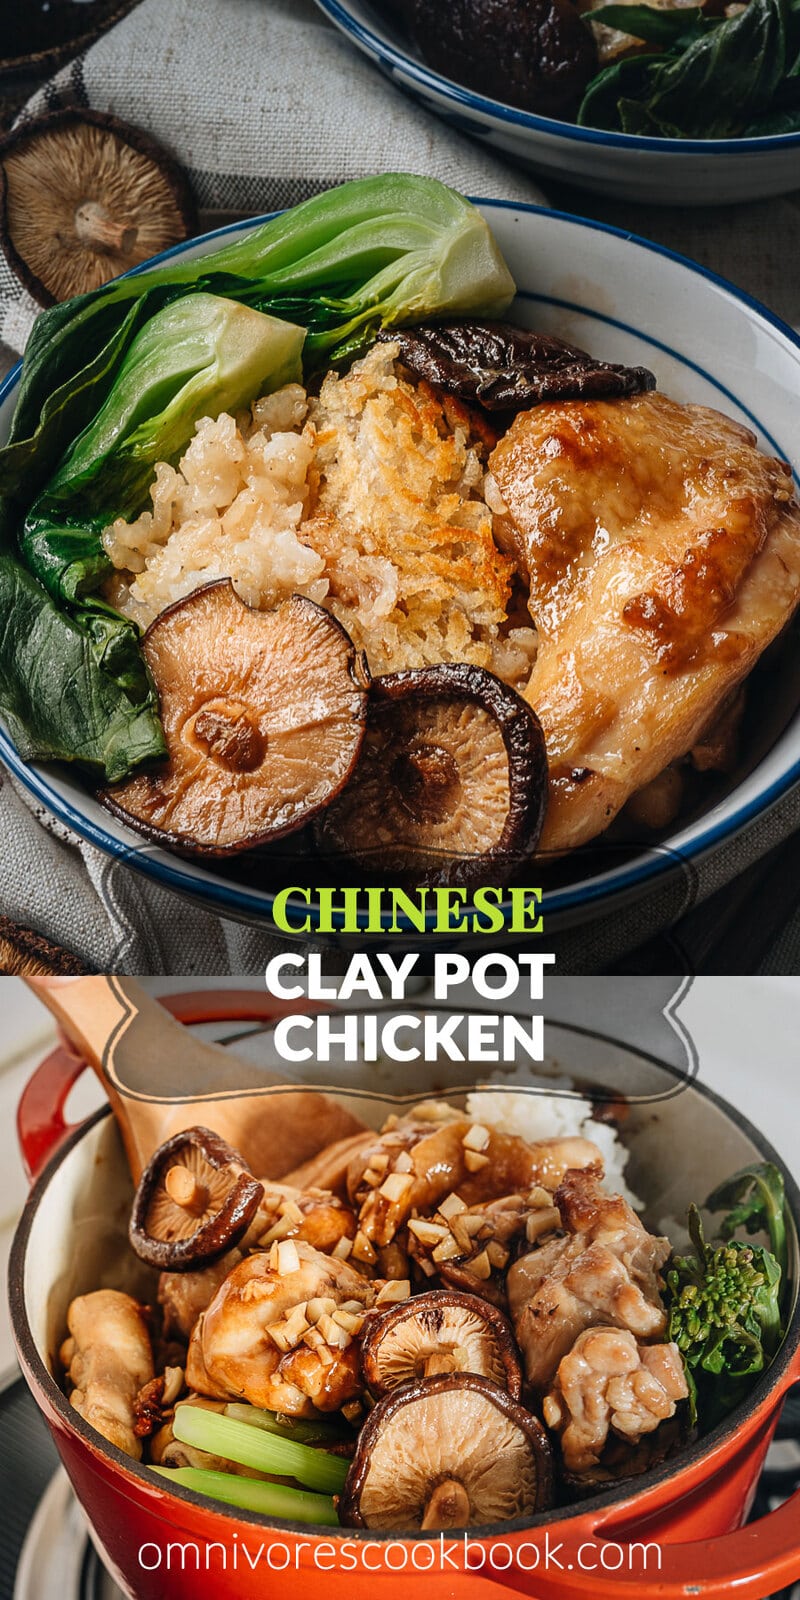 Clay Pot Chicken Rice - This clay pot chicken rice is so addictive! Beyond the greatness of the tender and moist chicken, the rice absorbs all the extract from the mushrooms and chicken grease, and is then seasoned with oyster sauce. It is SO good! My recipe teaches you the easiest way to create a super flavorful one-pot dinner without a clay pot or rice cooker.